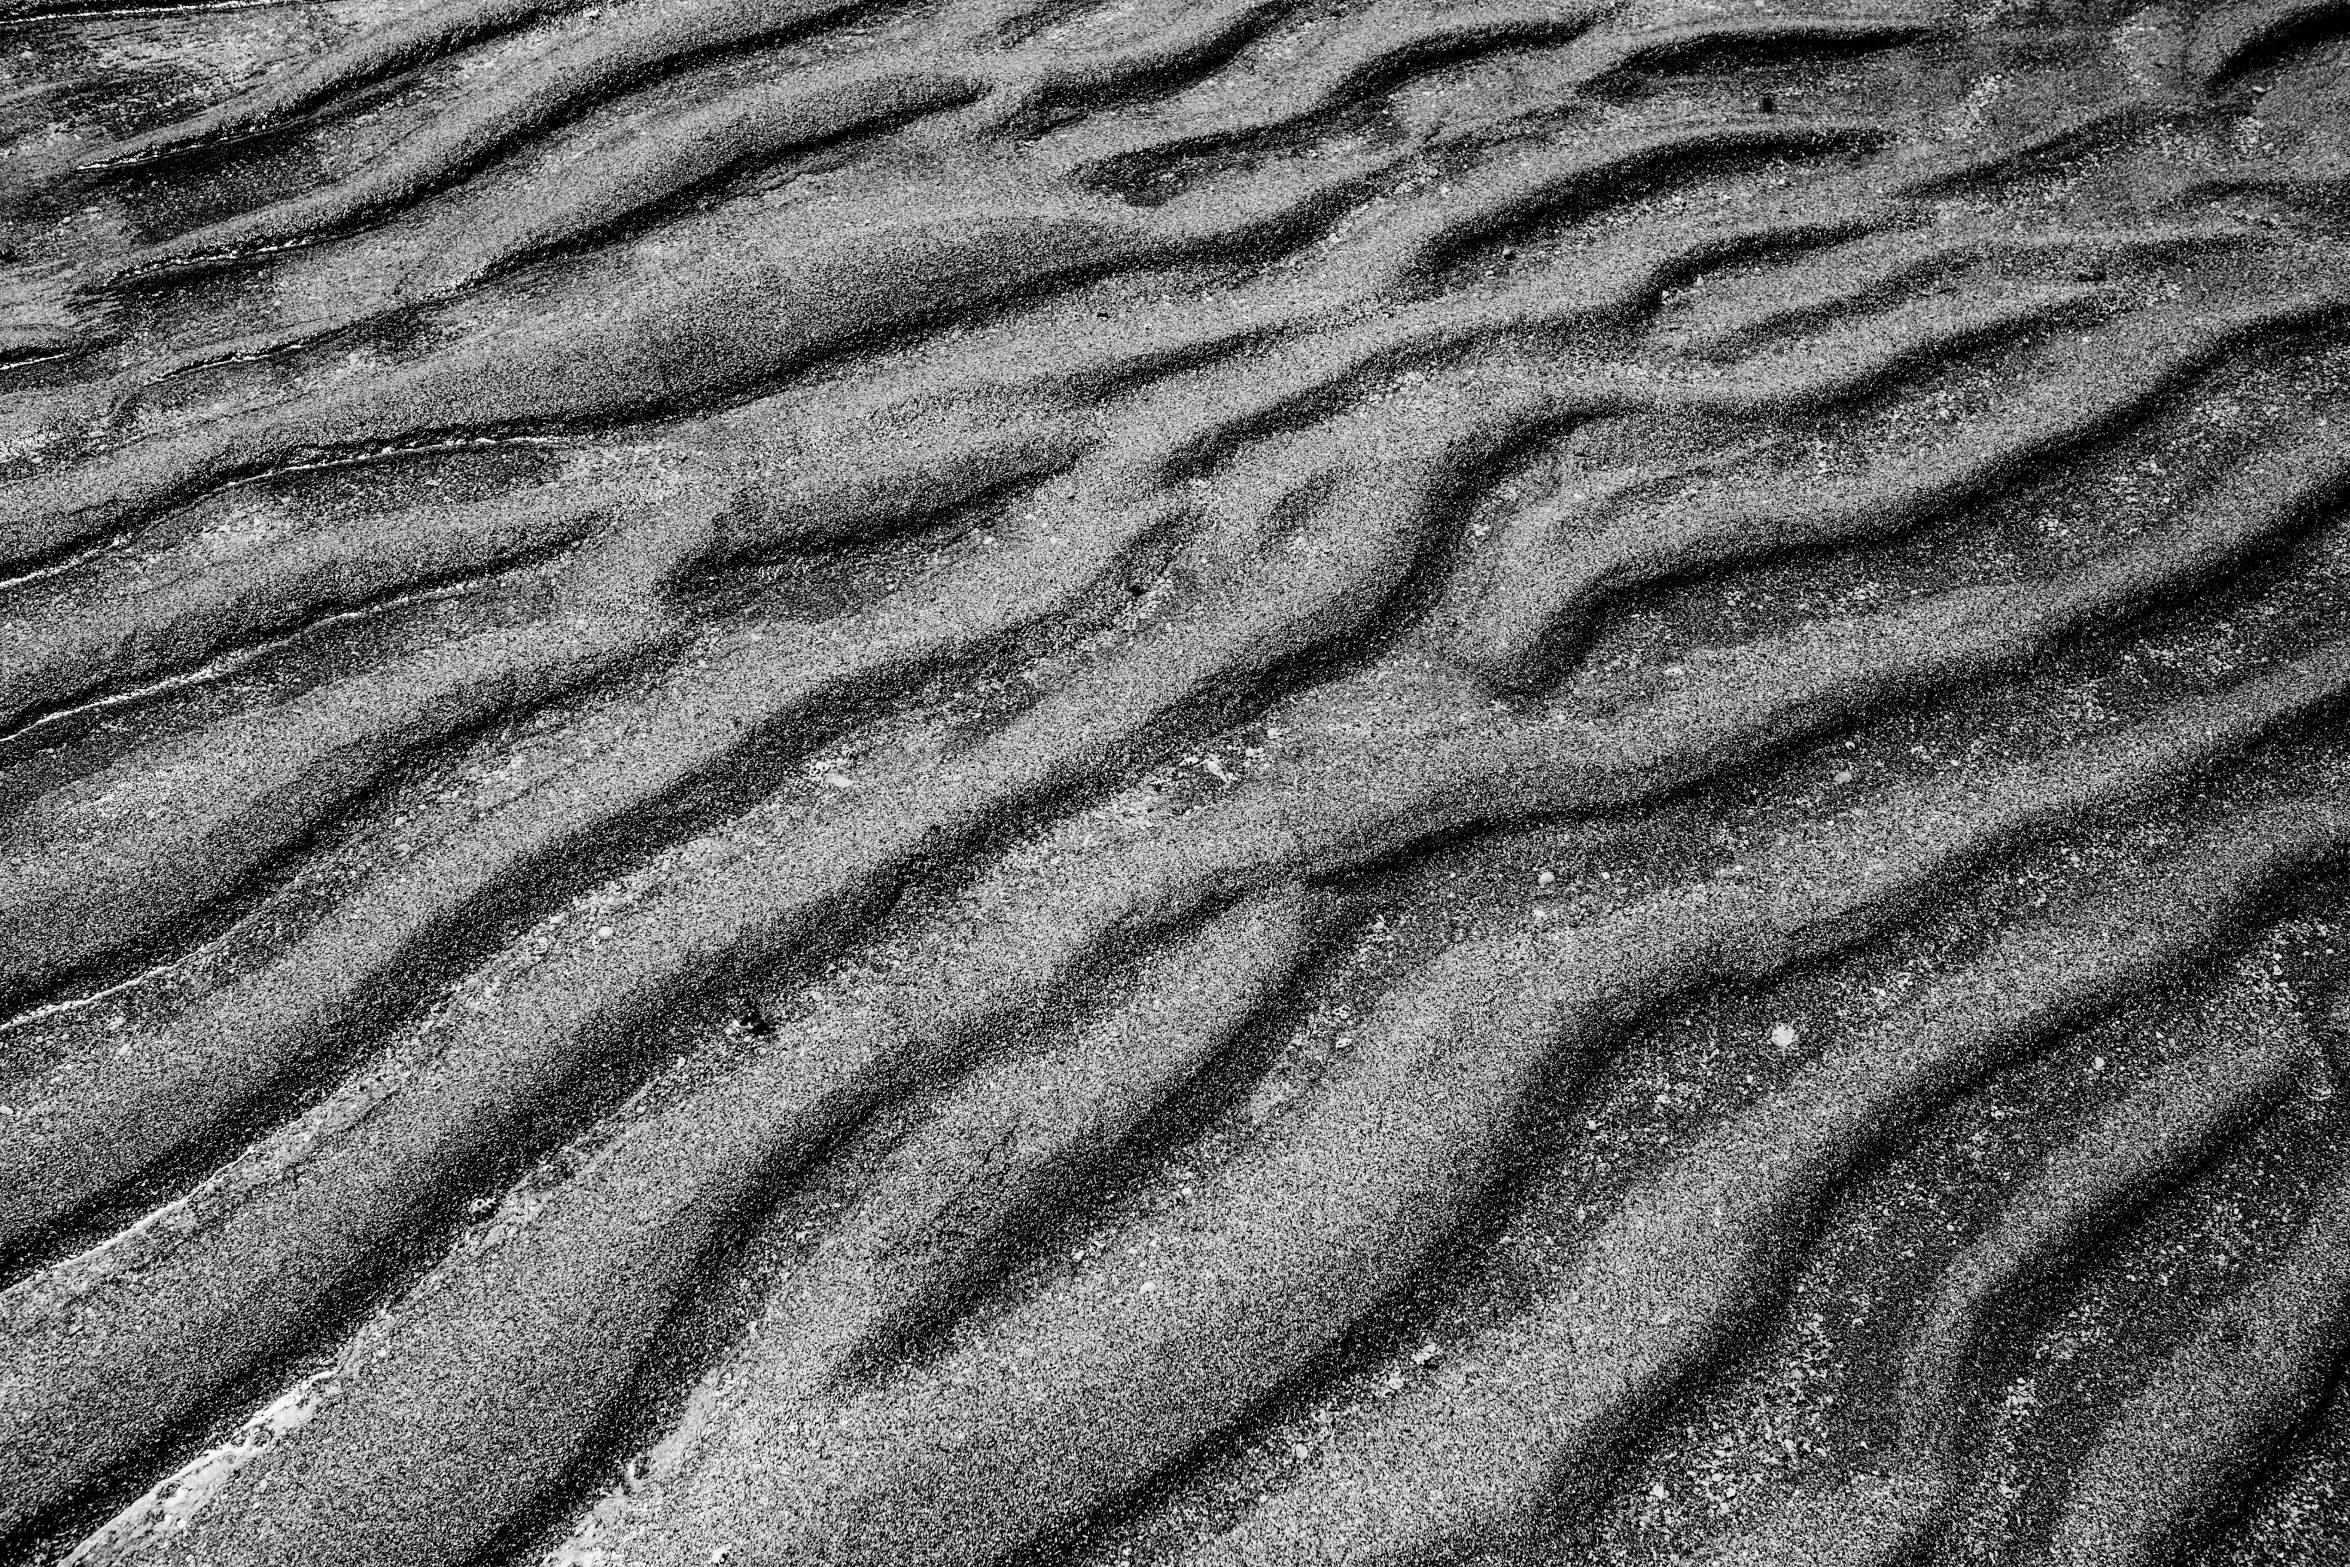 the bottom of a sand dune that is wavy